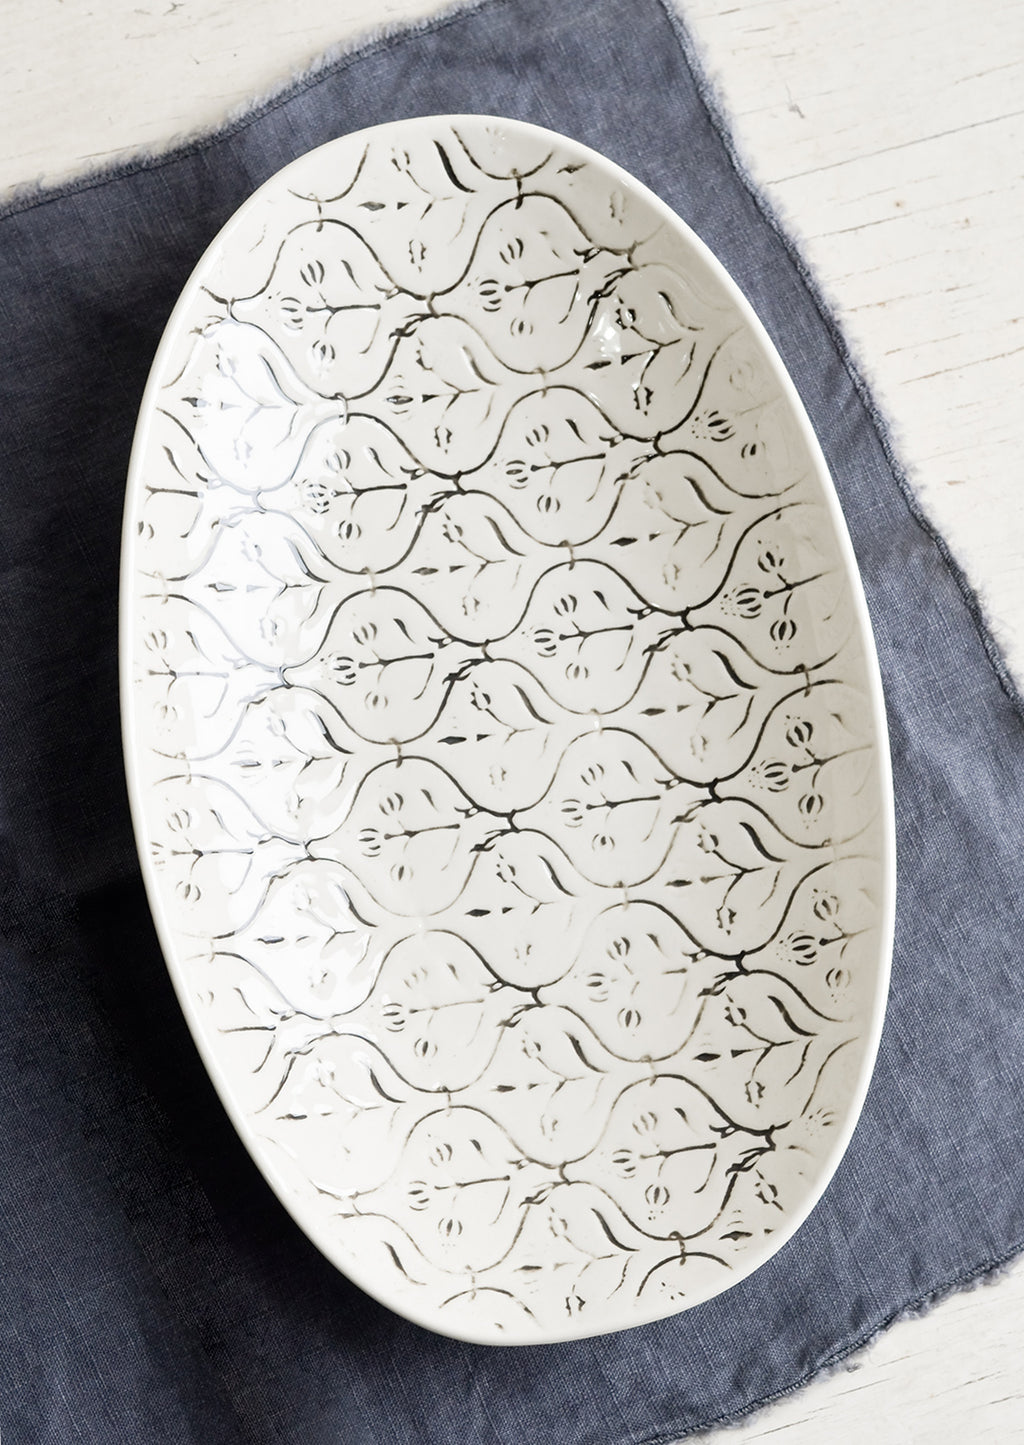 Small: A smaller oval shaped ceramic platter with black and white textile pattern.